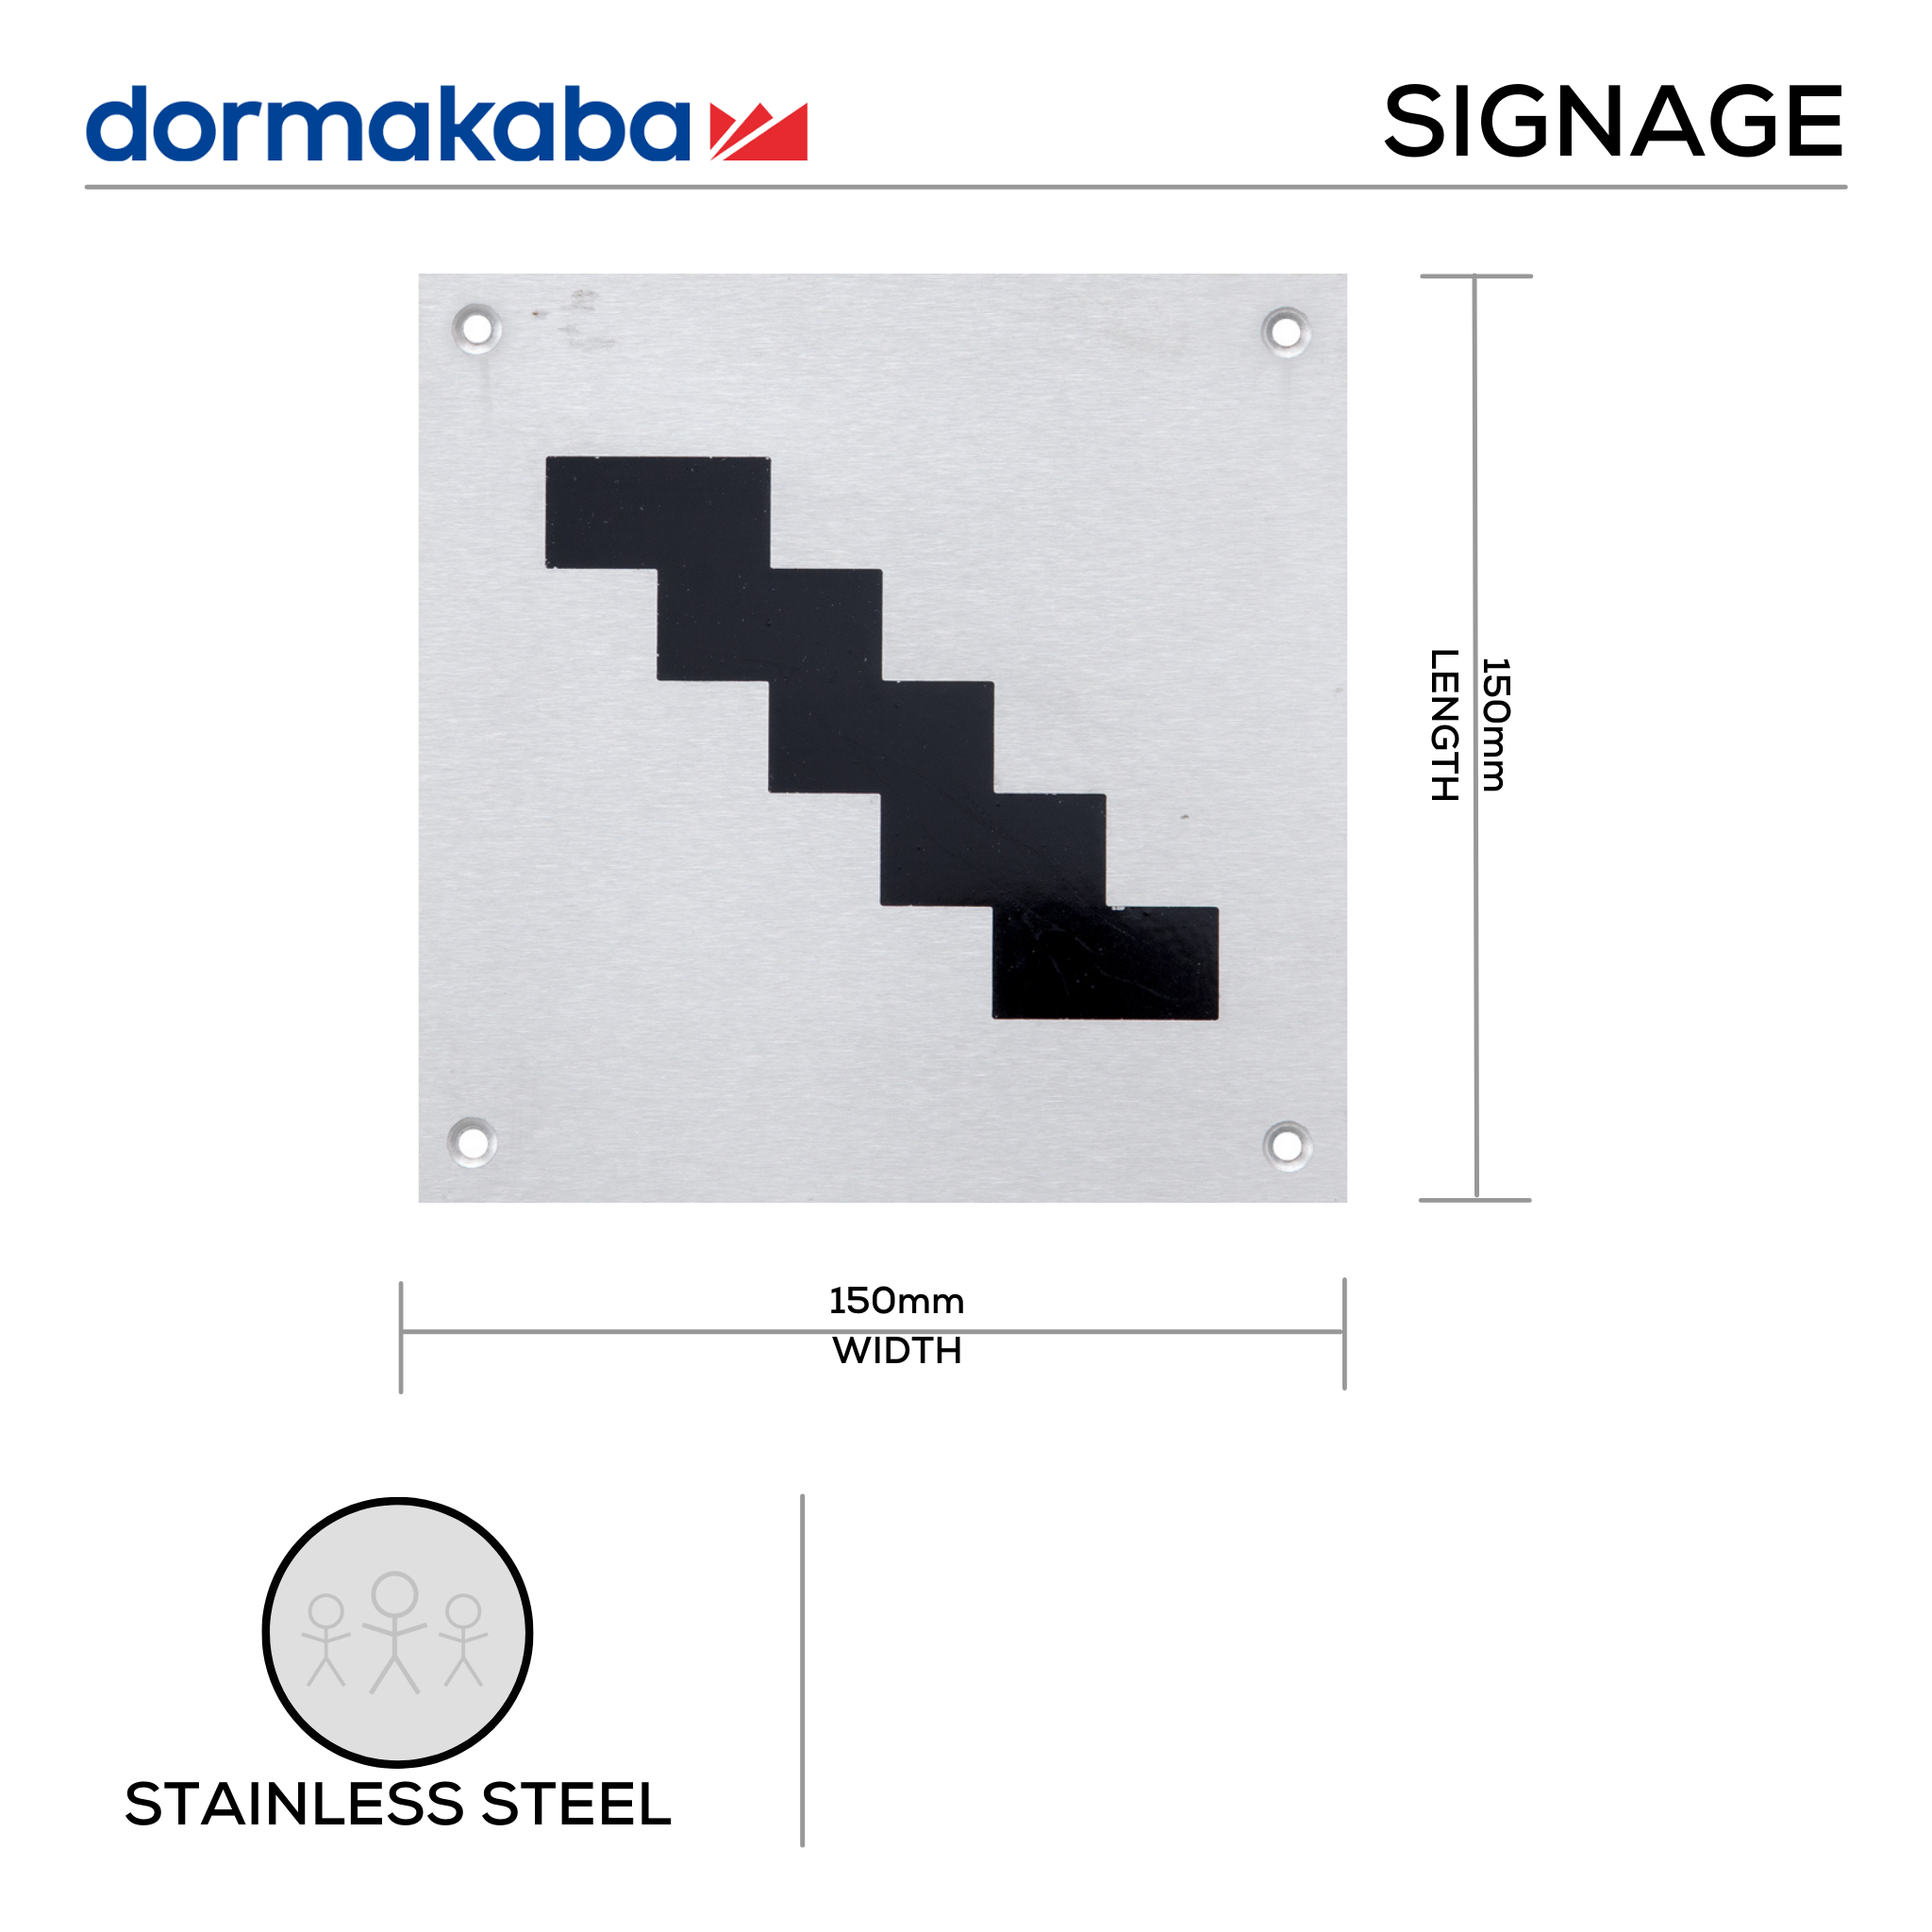 DSS-142, Door Signage, Stairs , 150mm (l), 150mm (w), 1,2mm (t), Stainless Steel, DORMAKABA